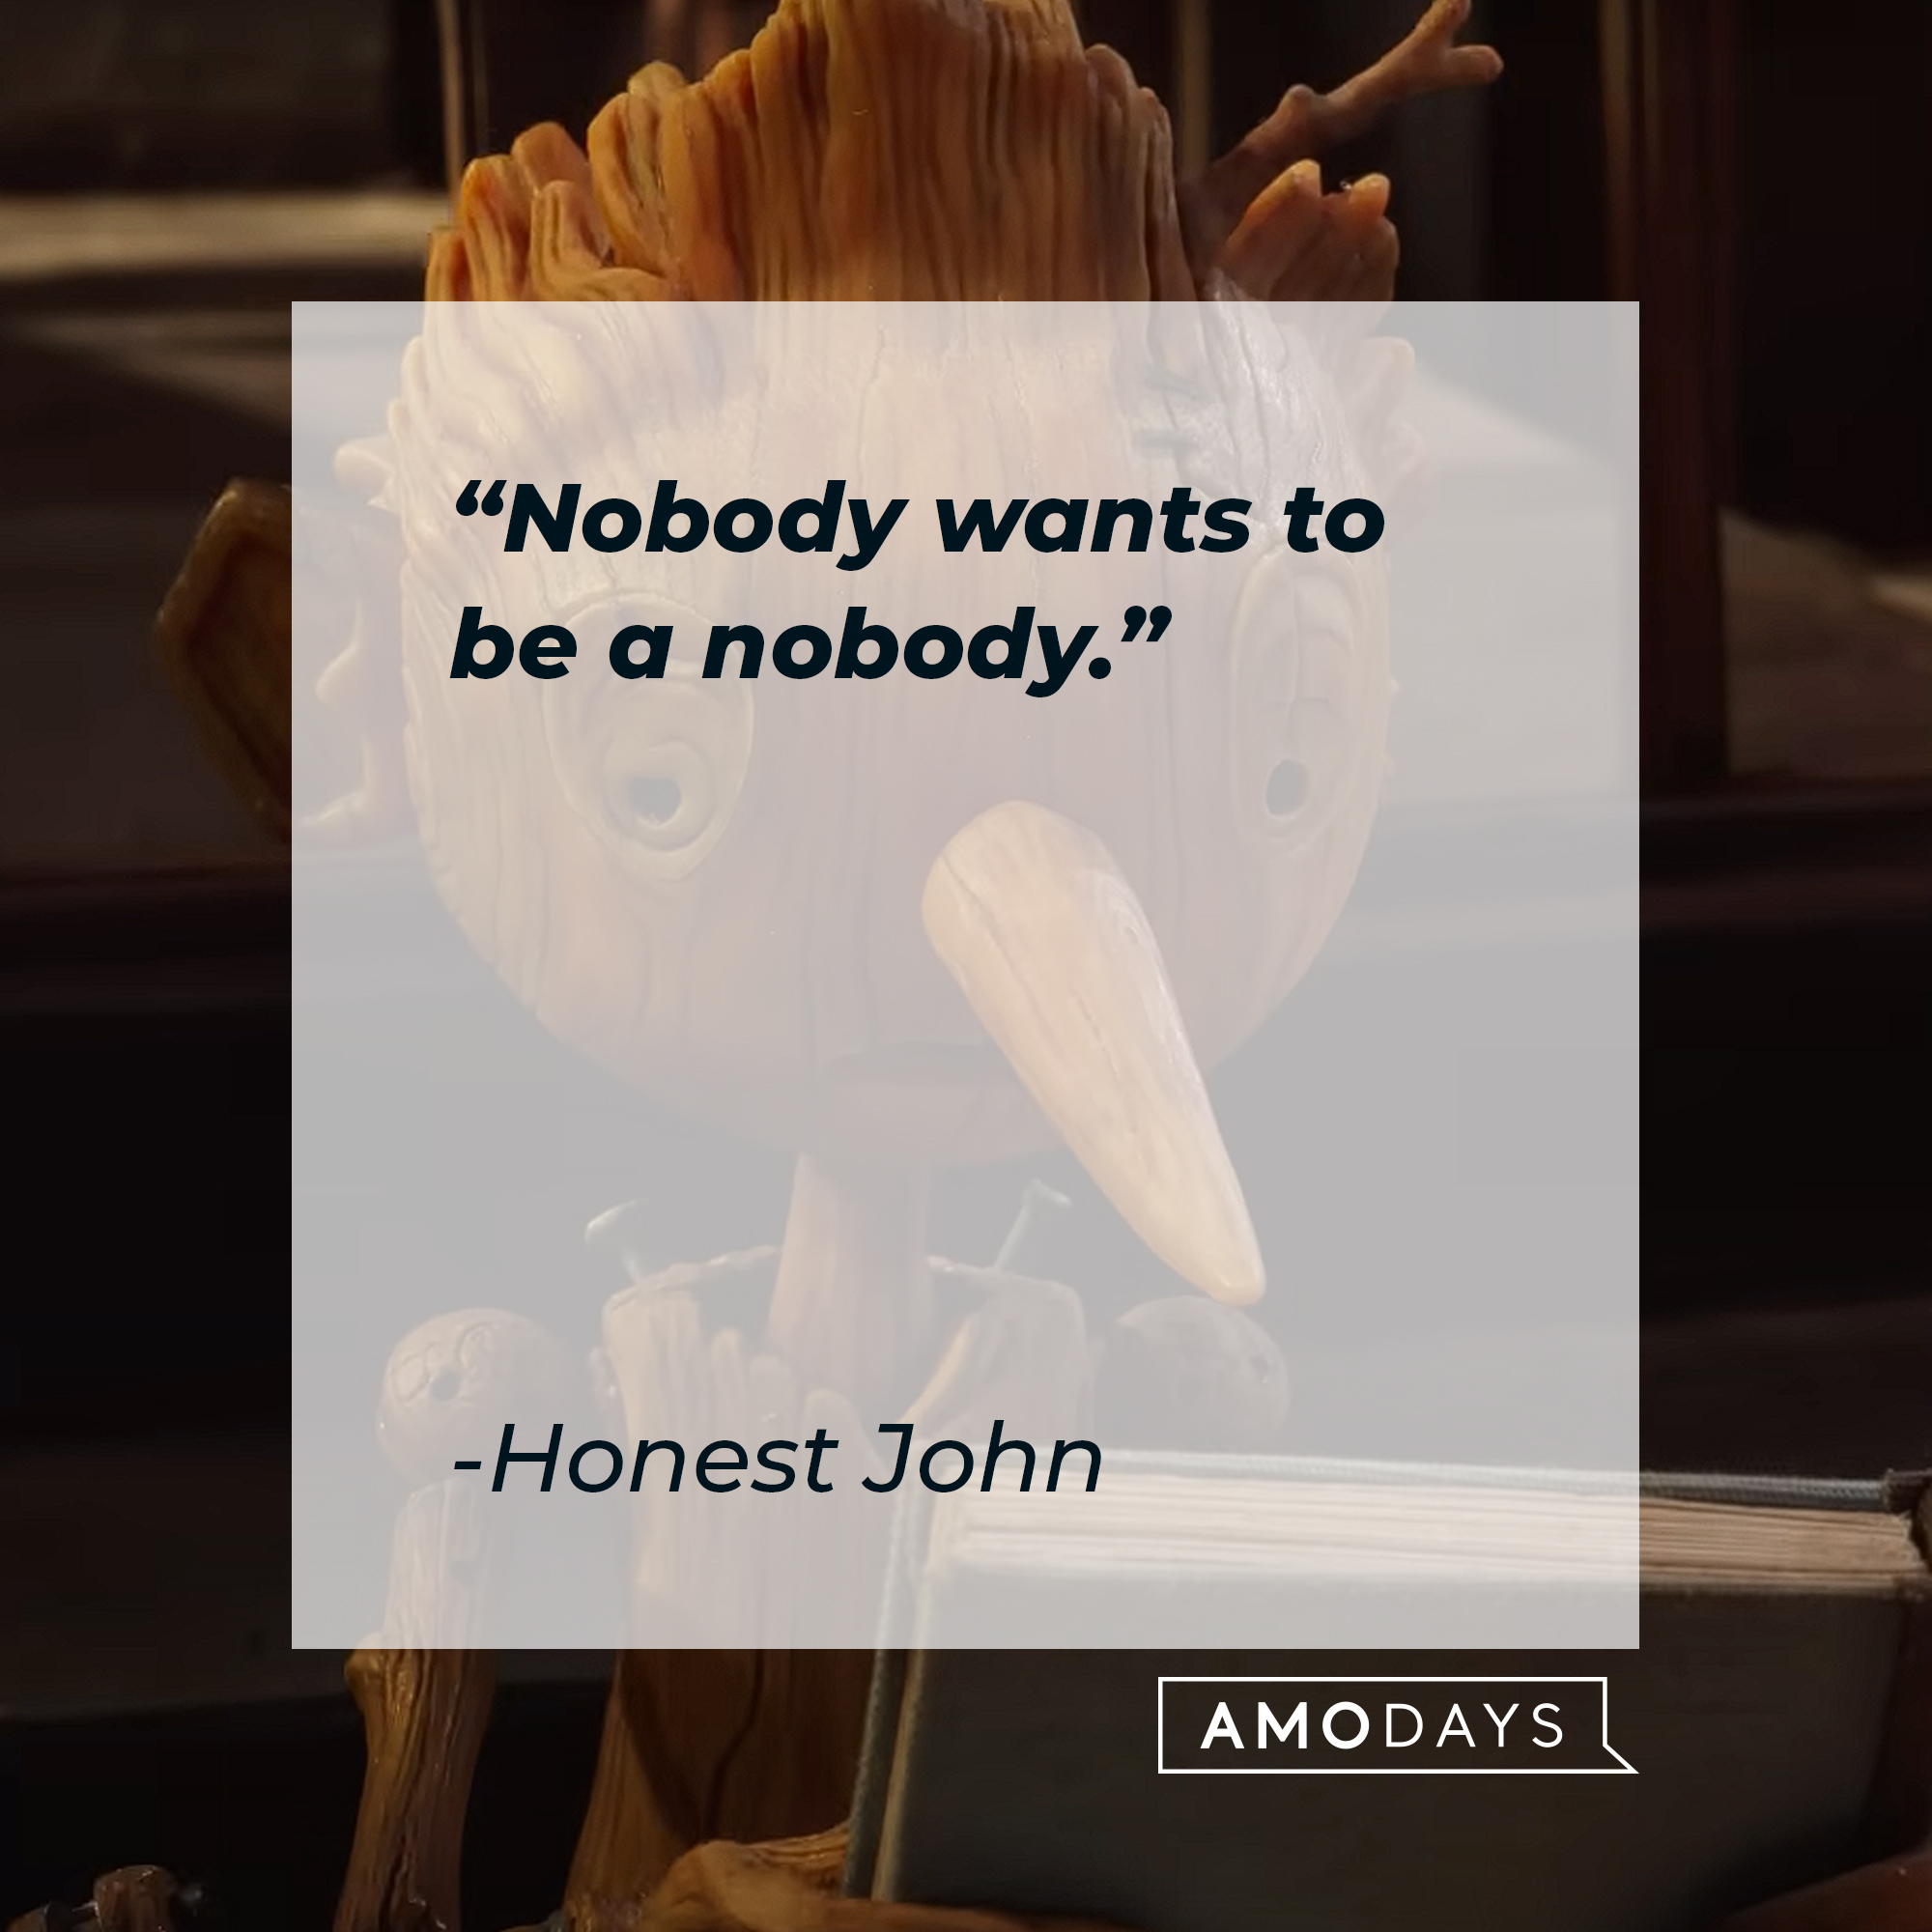 Honest John's quote: "Nobody wants to be a nobody." | Image: AmoDays